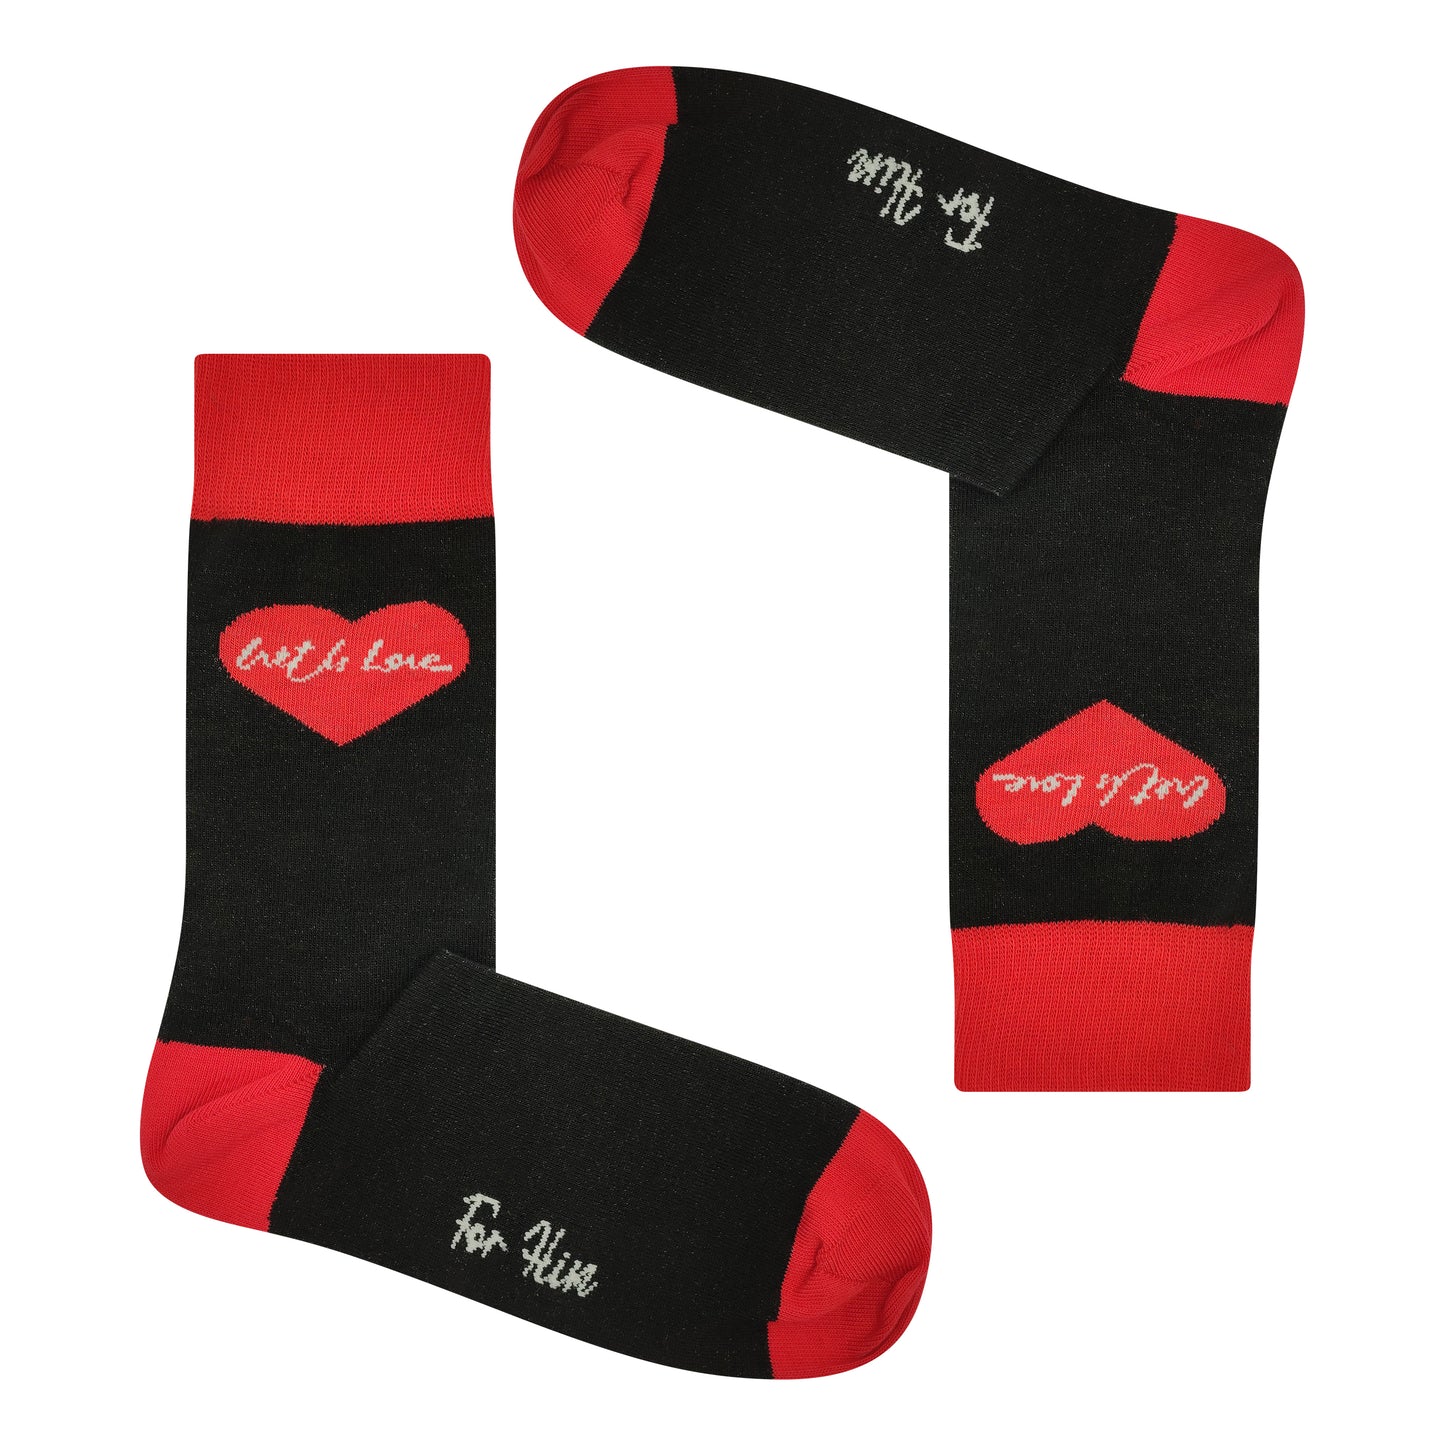 With Love Socks Gift Box - For Him & For Her (Mixed Sizes)